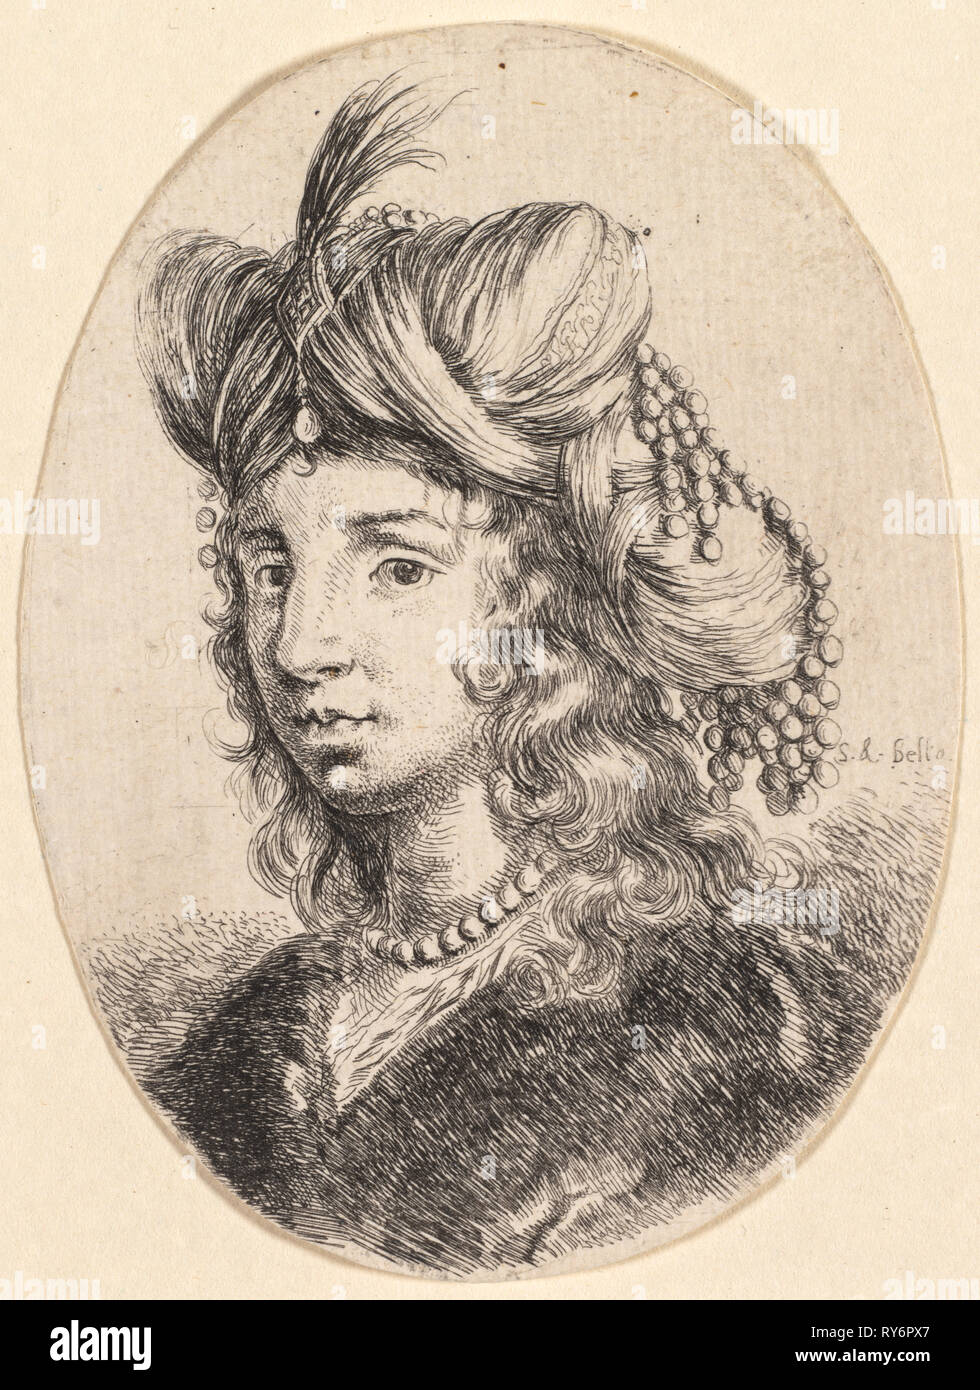 Several heads in the Persian style: Portrait, Sultana Wearing a Pearl Necklace and a Turban (Plusieurs têtes coiffées à la persienne), 1649-50. Stefano Della Bella (Italian, 1610-1664). Etching Stock Photo